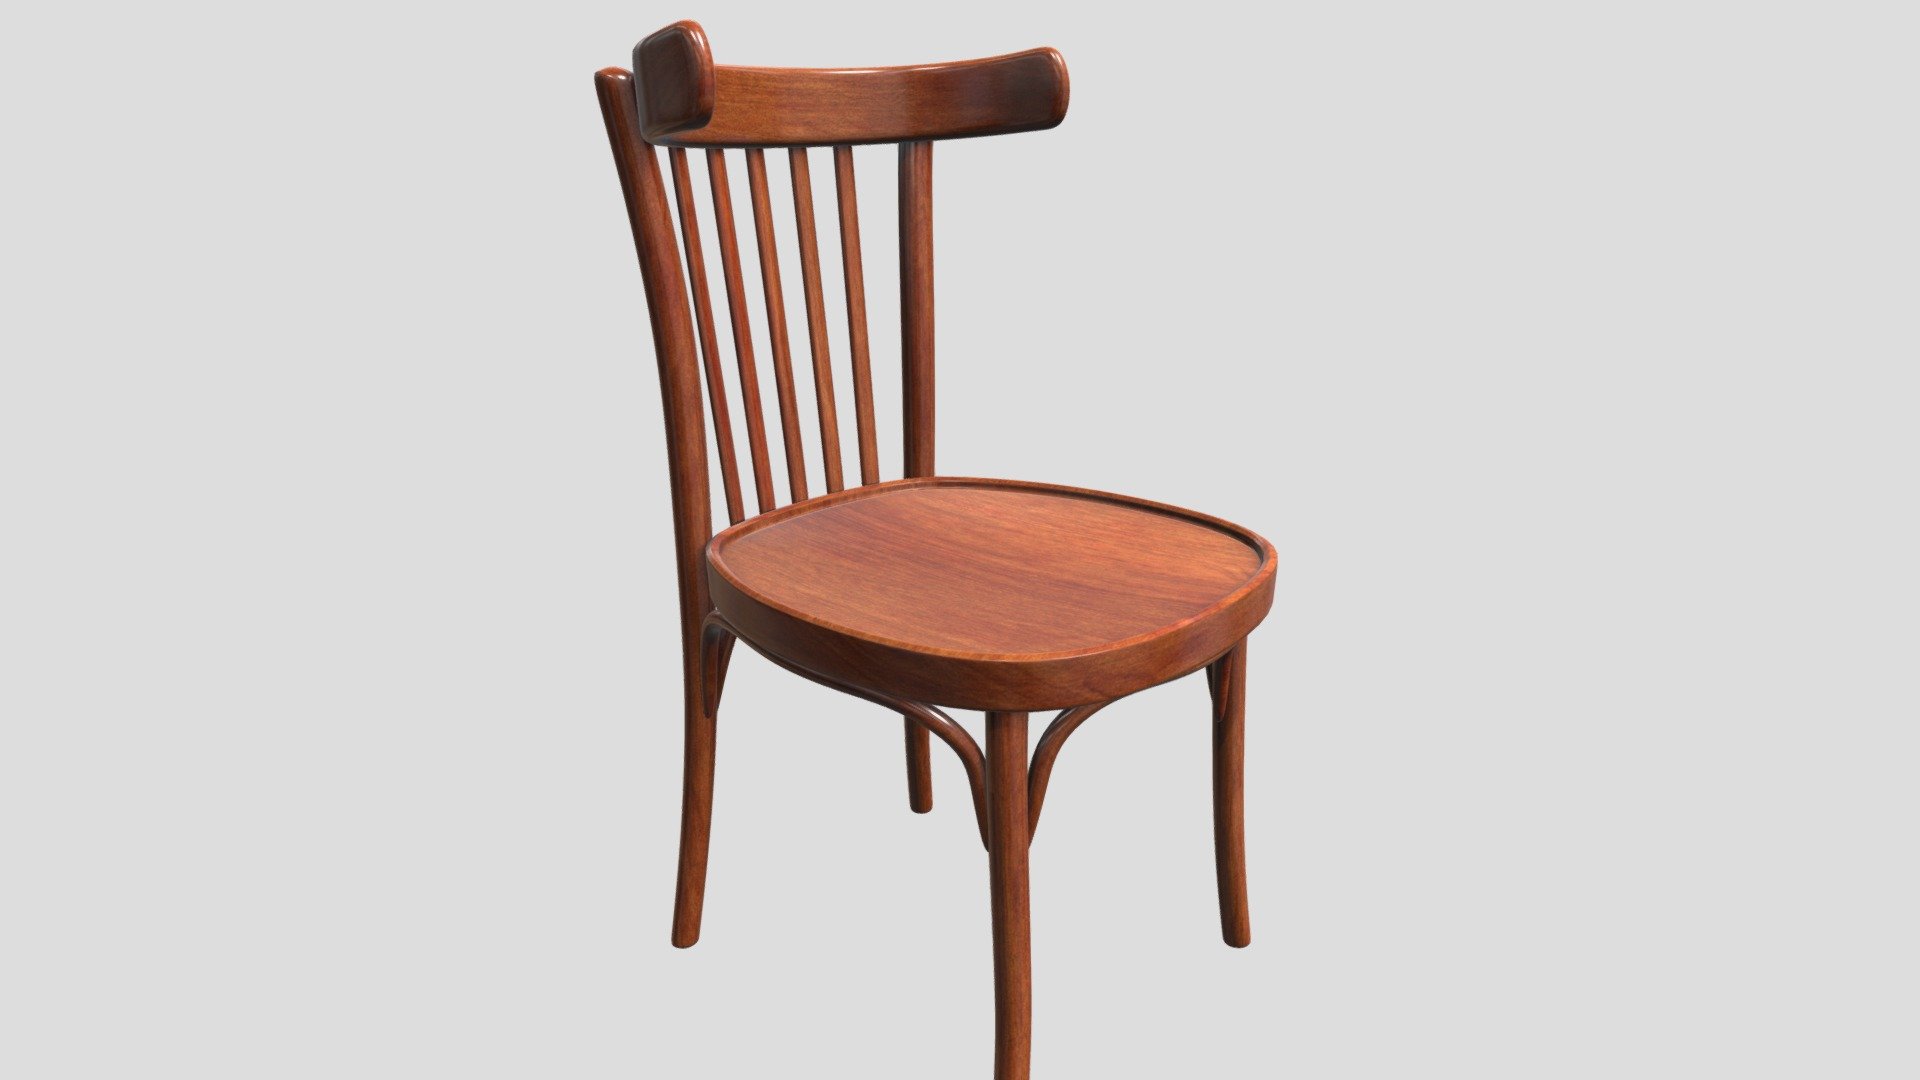 Nice Old wood Chair

Made with Blender all texure include

If you leave a comment will be appreciated

Ty Miky - Old Wood Chair - Download Free 3D model by mikynetwork 3d model